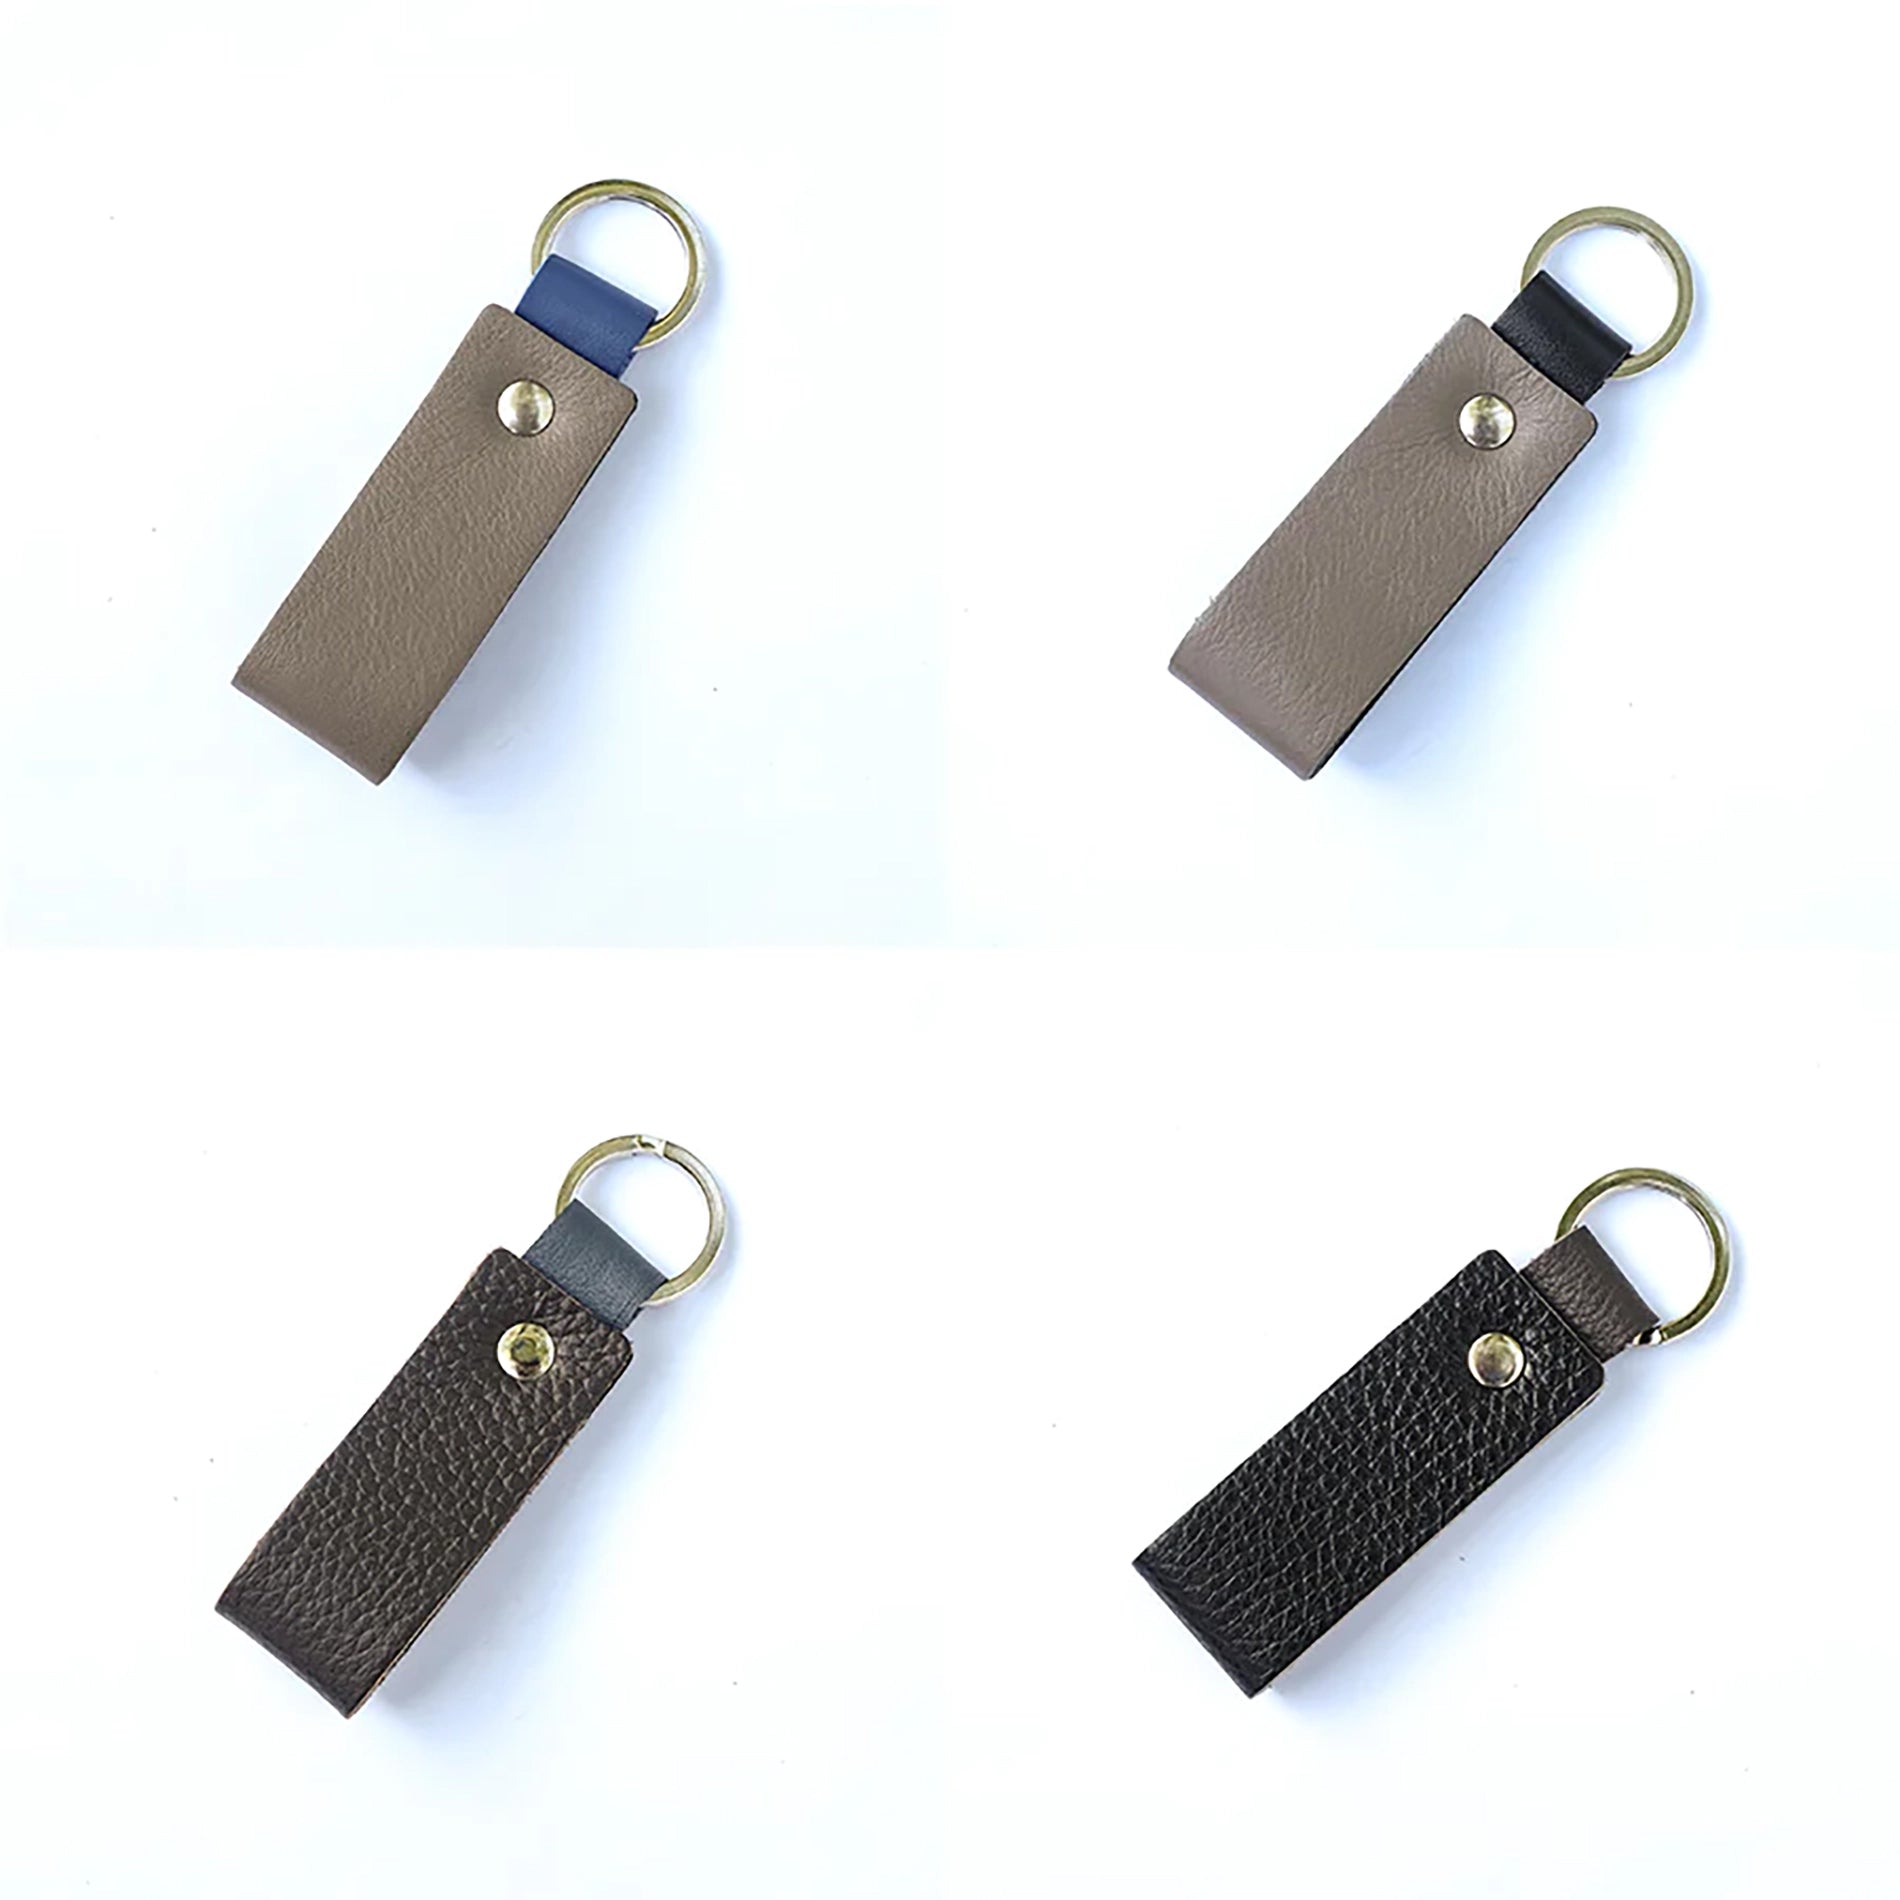 Nero Wallet - Cool Leather Keychain for Men and Women - Key Holder - Key Organizer - Double Colors Leather - Set of 2 - Random Colors - minimalist mens wallet